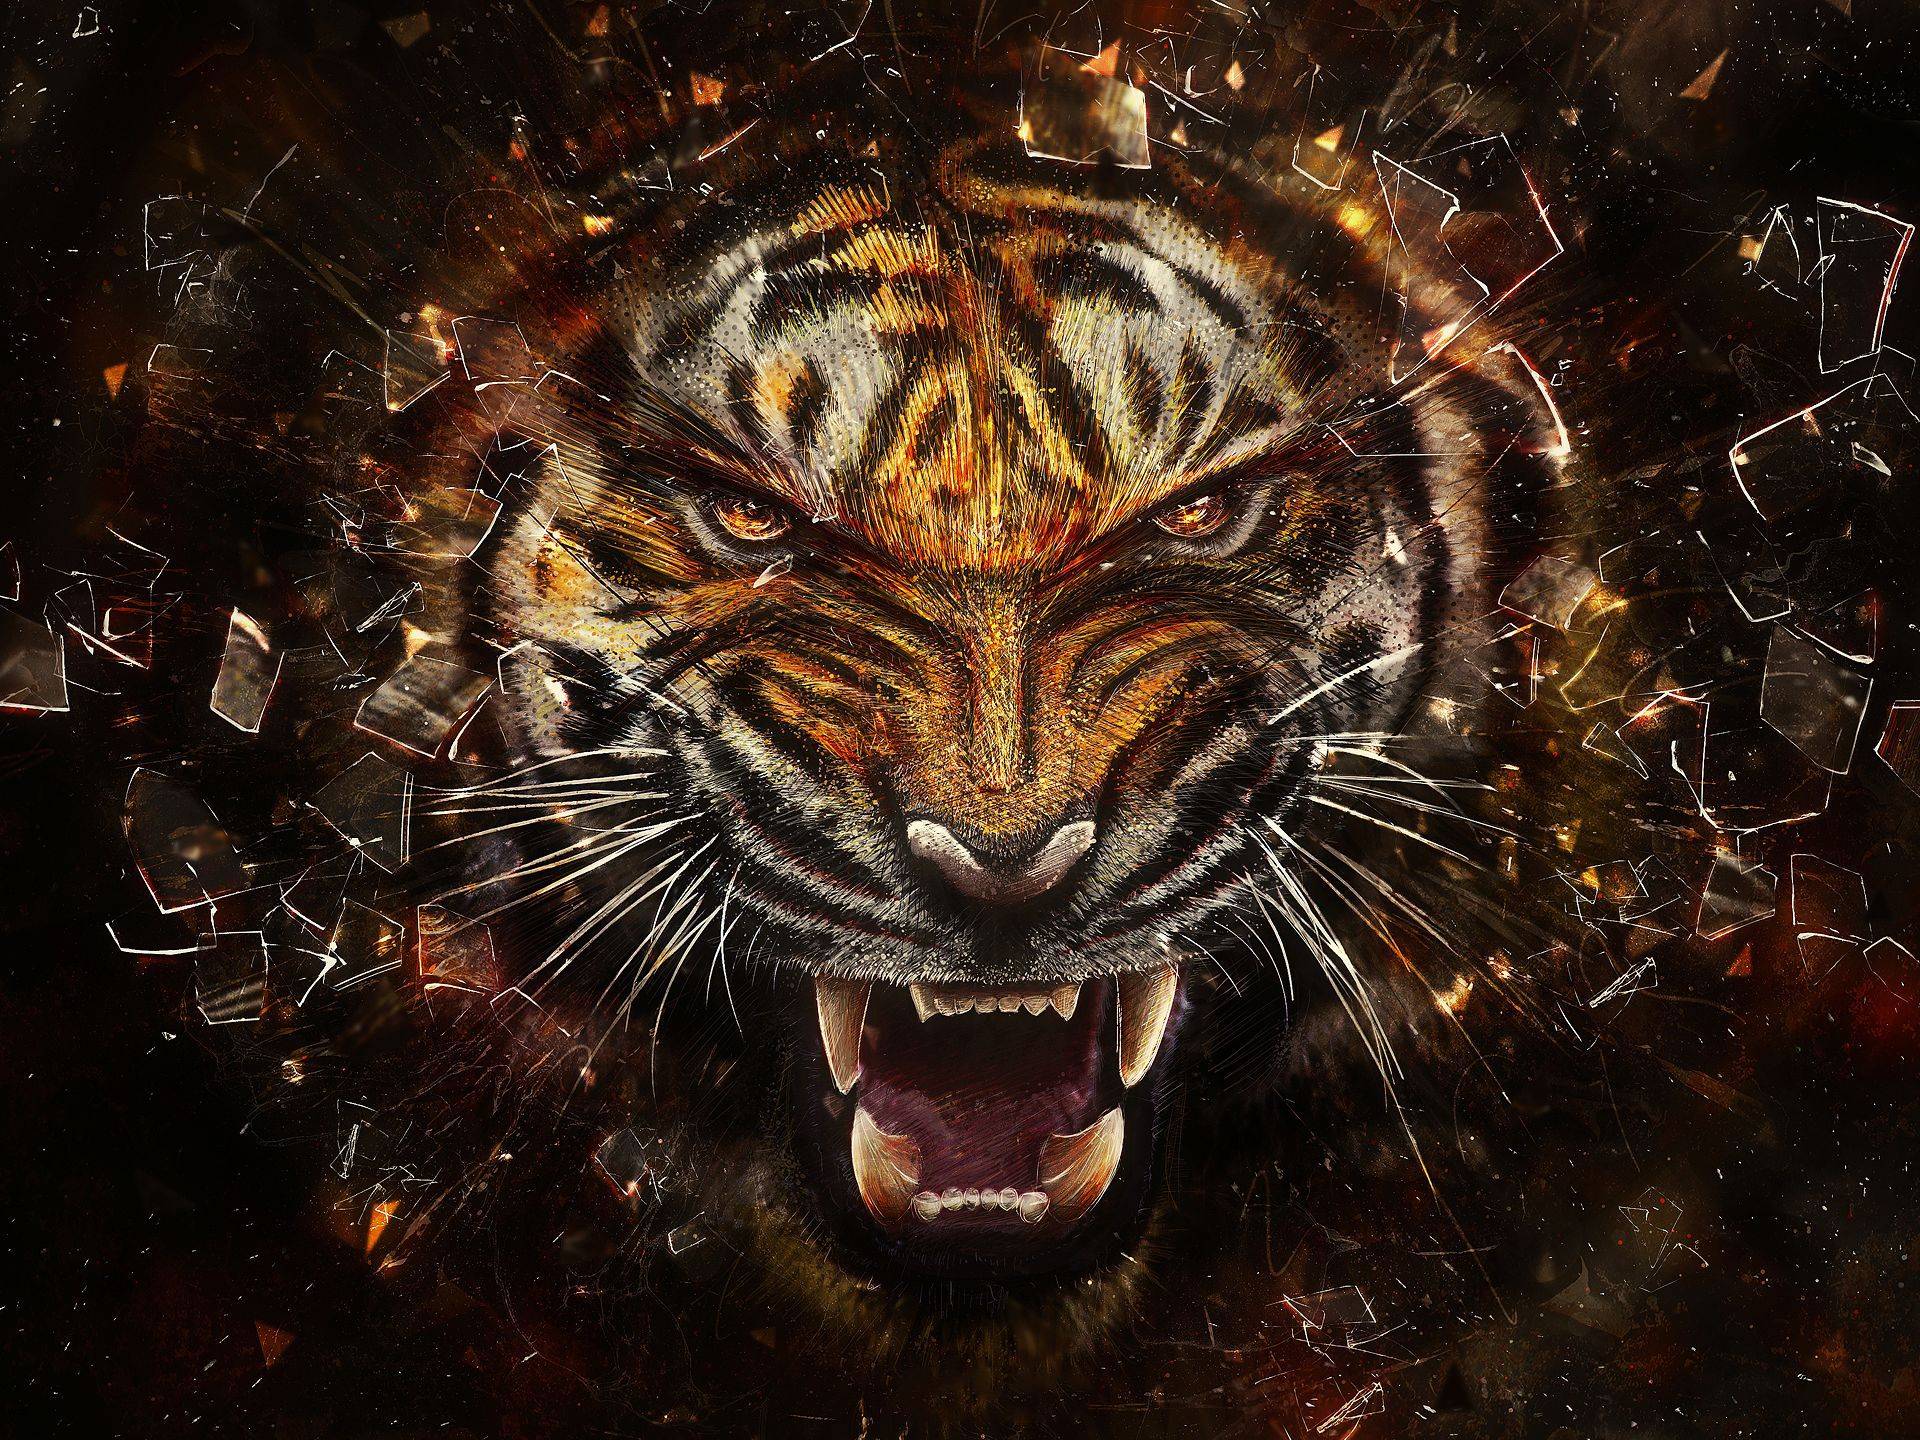 Cool tiger wallpapers